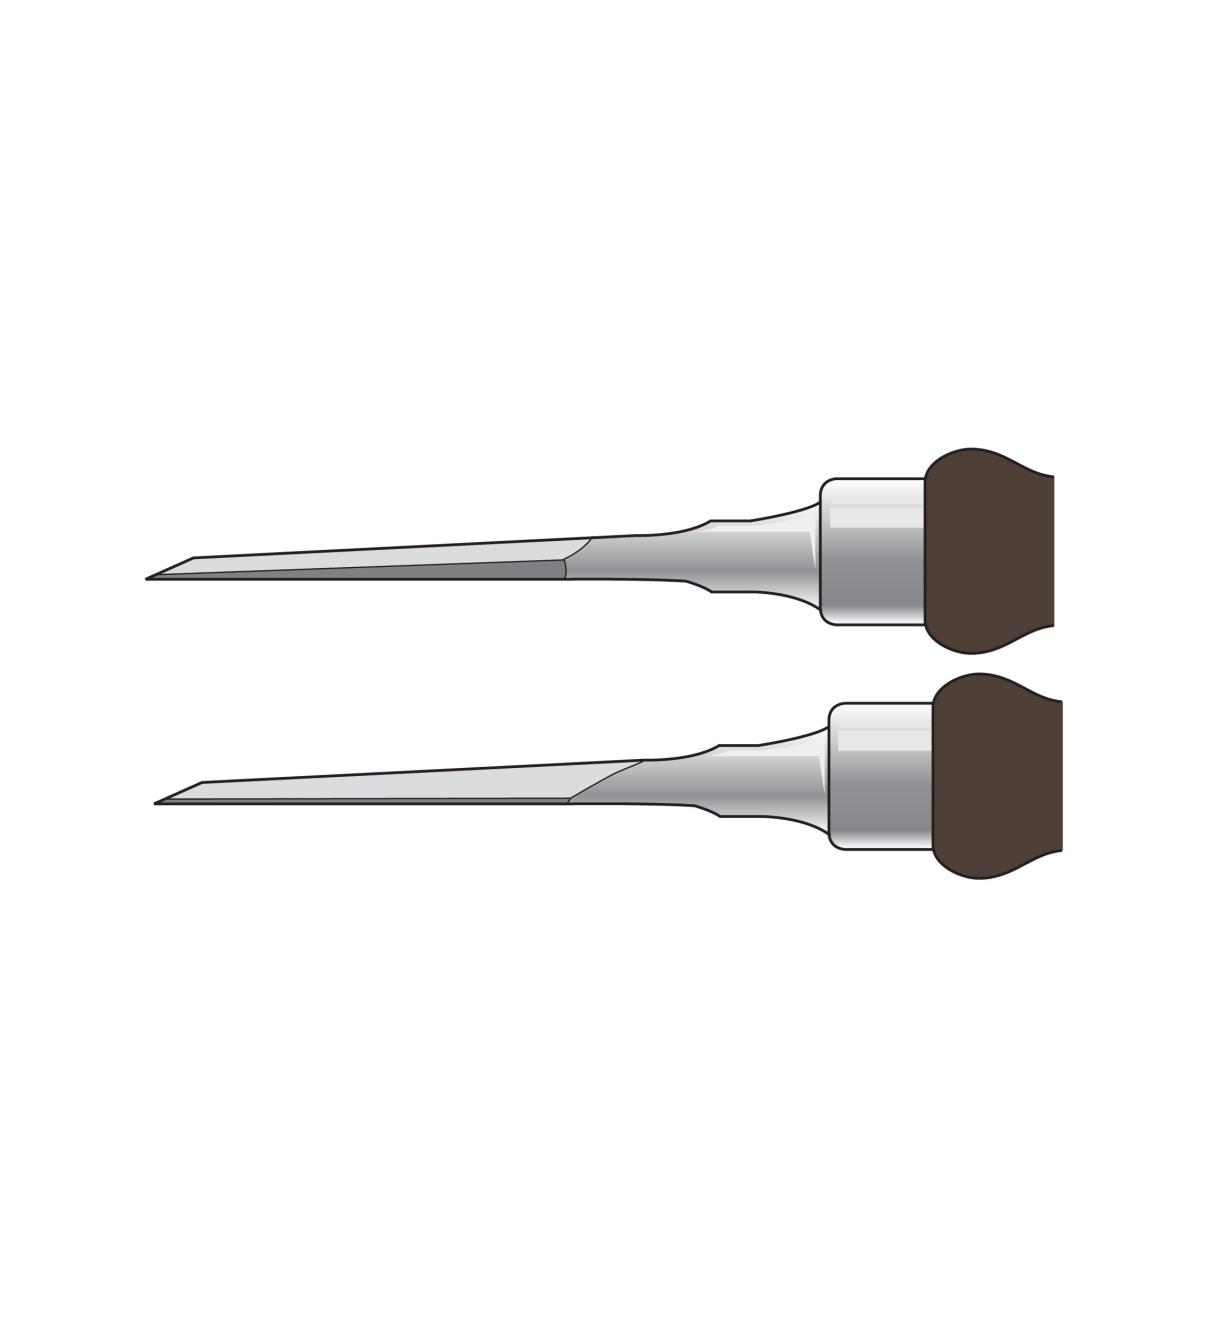 Illustrations of typical chisel blade and Narex chisel blade for comparison